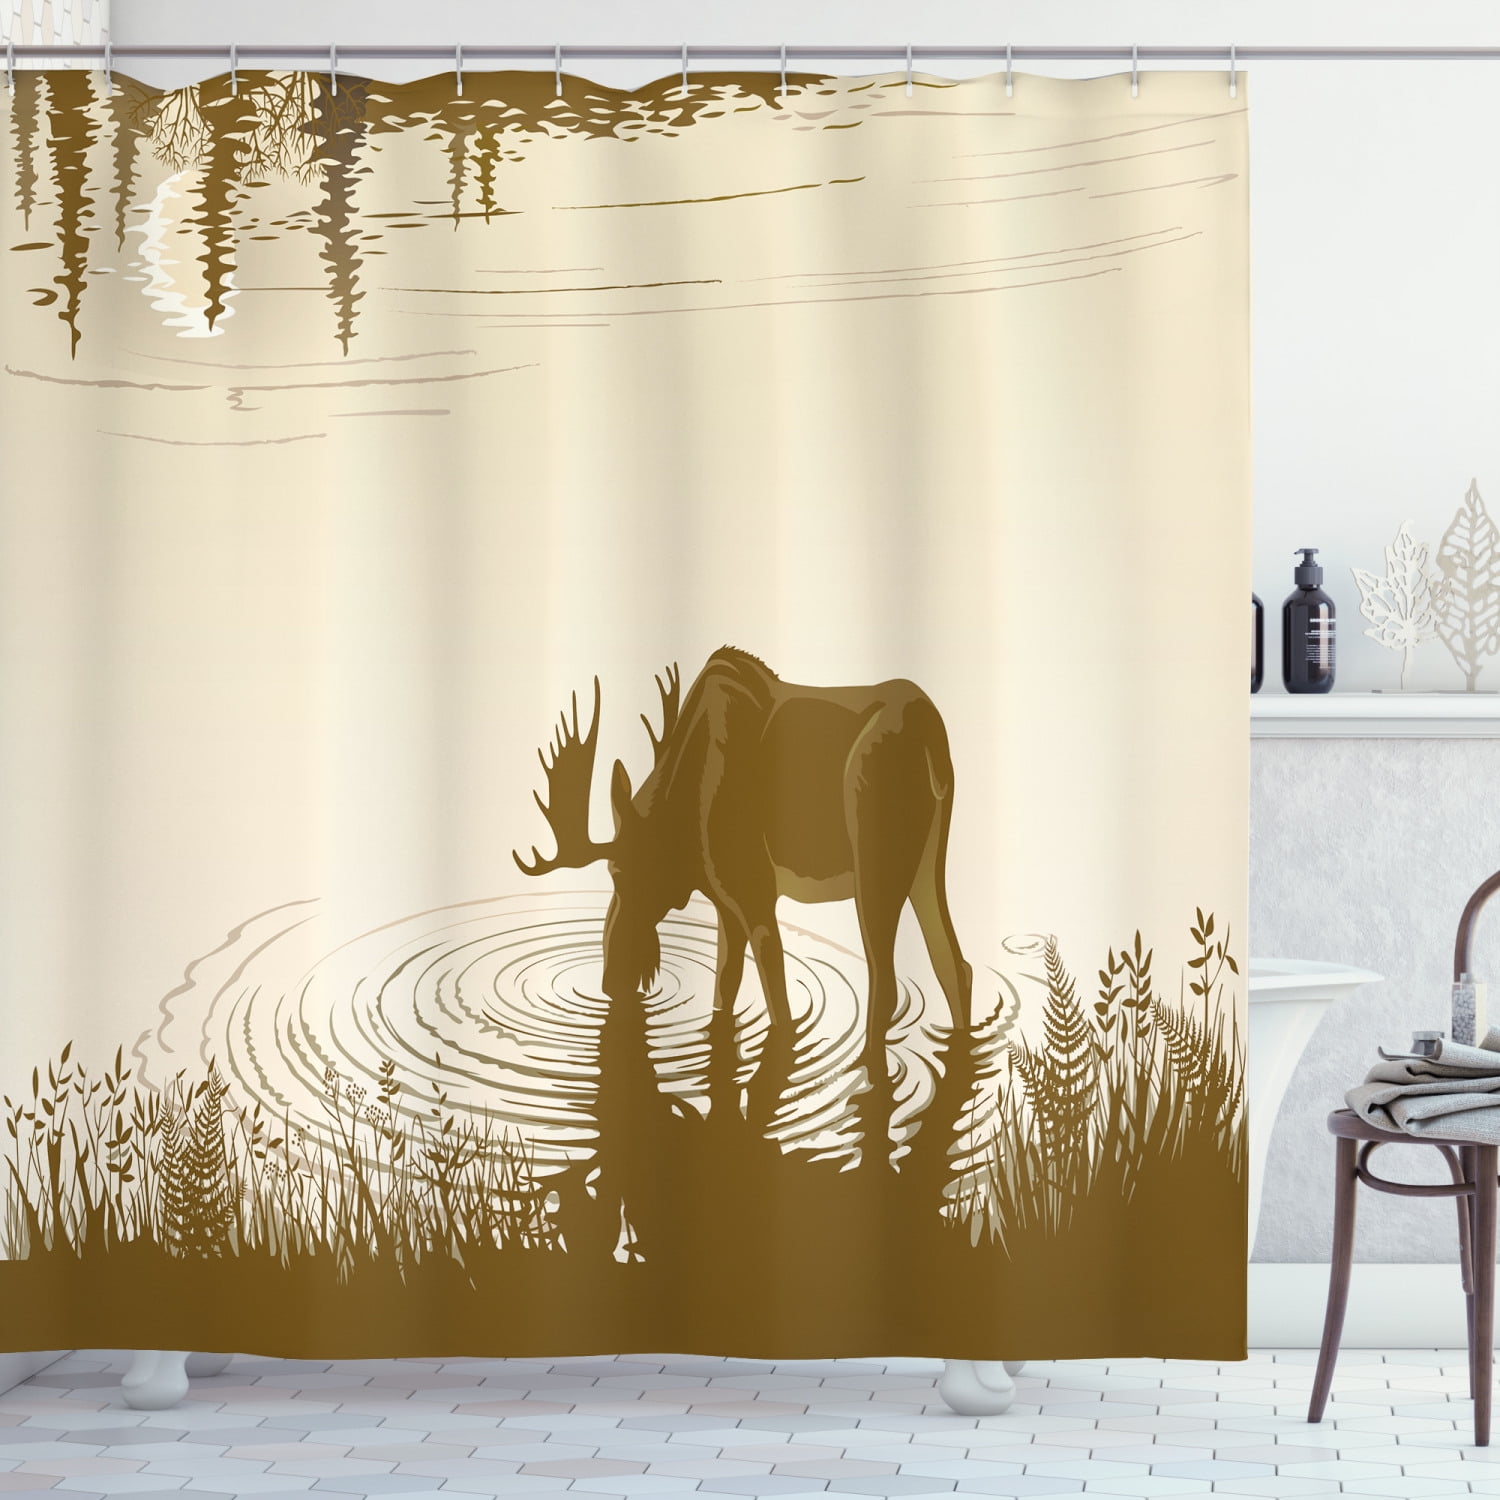 Wild Elk in Forest Bathroom Polyester Fabric Shower Curtain Set 12 Hooks 71inch 